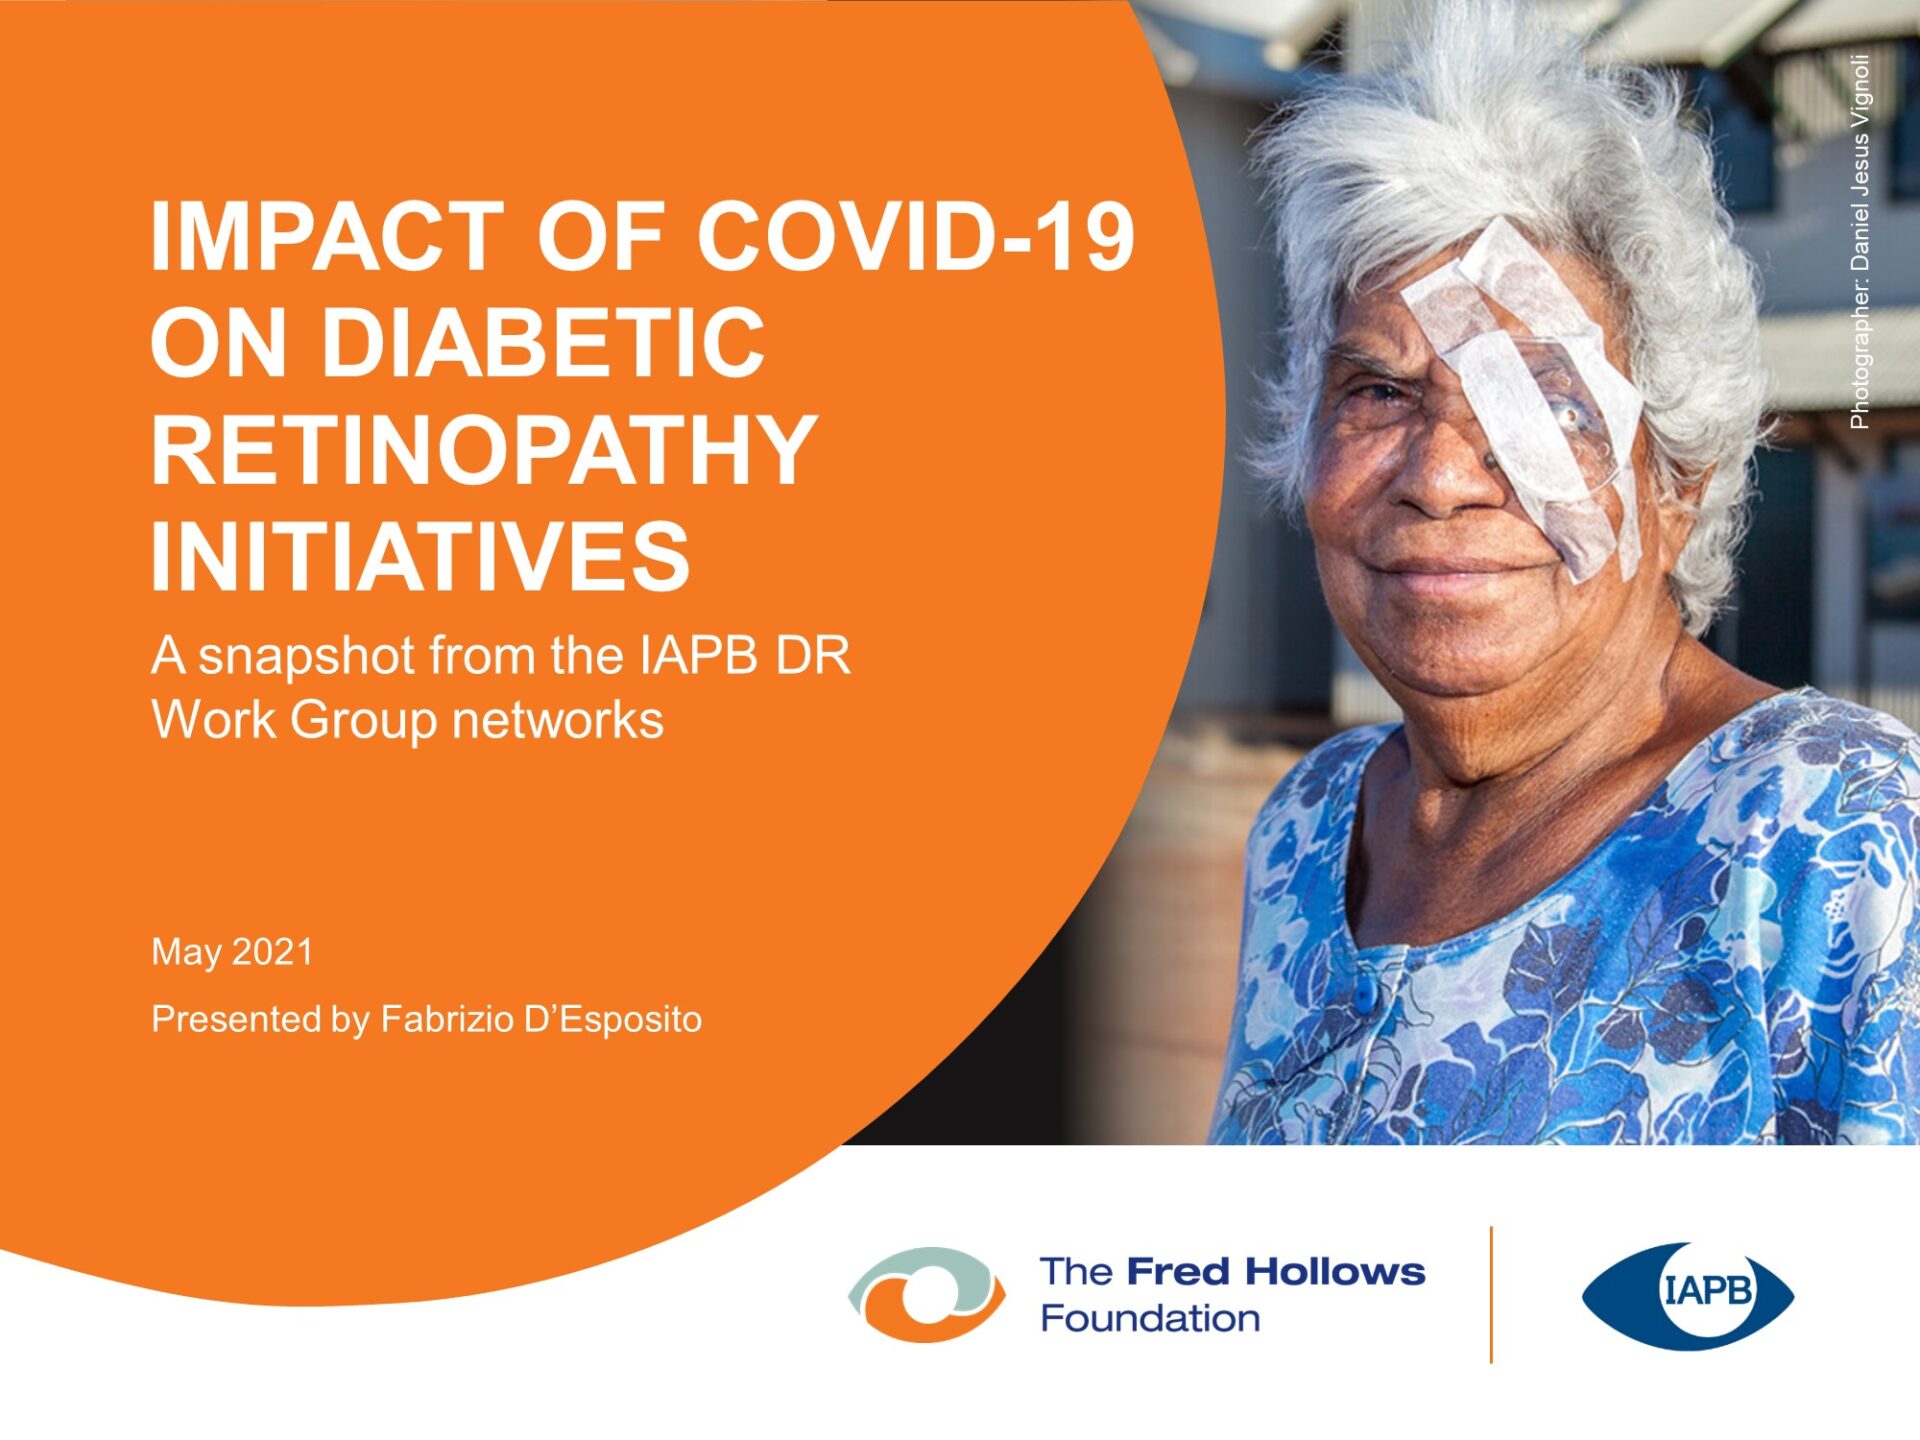 Impact of COVID-19 on Diabetic Retinopathy Initiatives PowerPoint cover